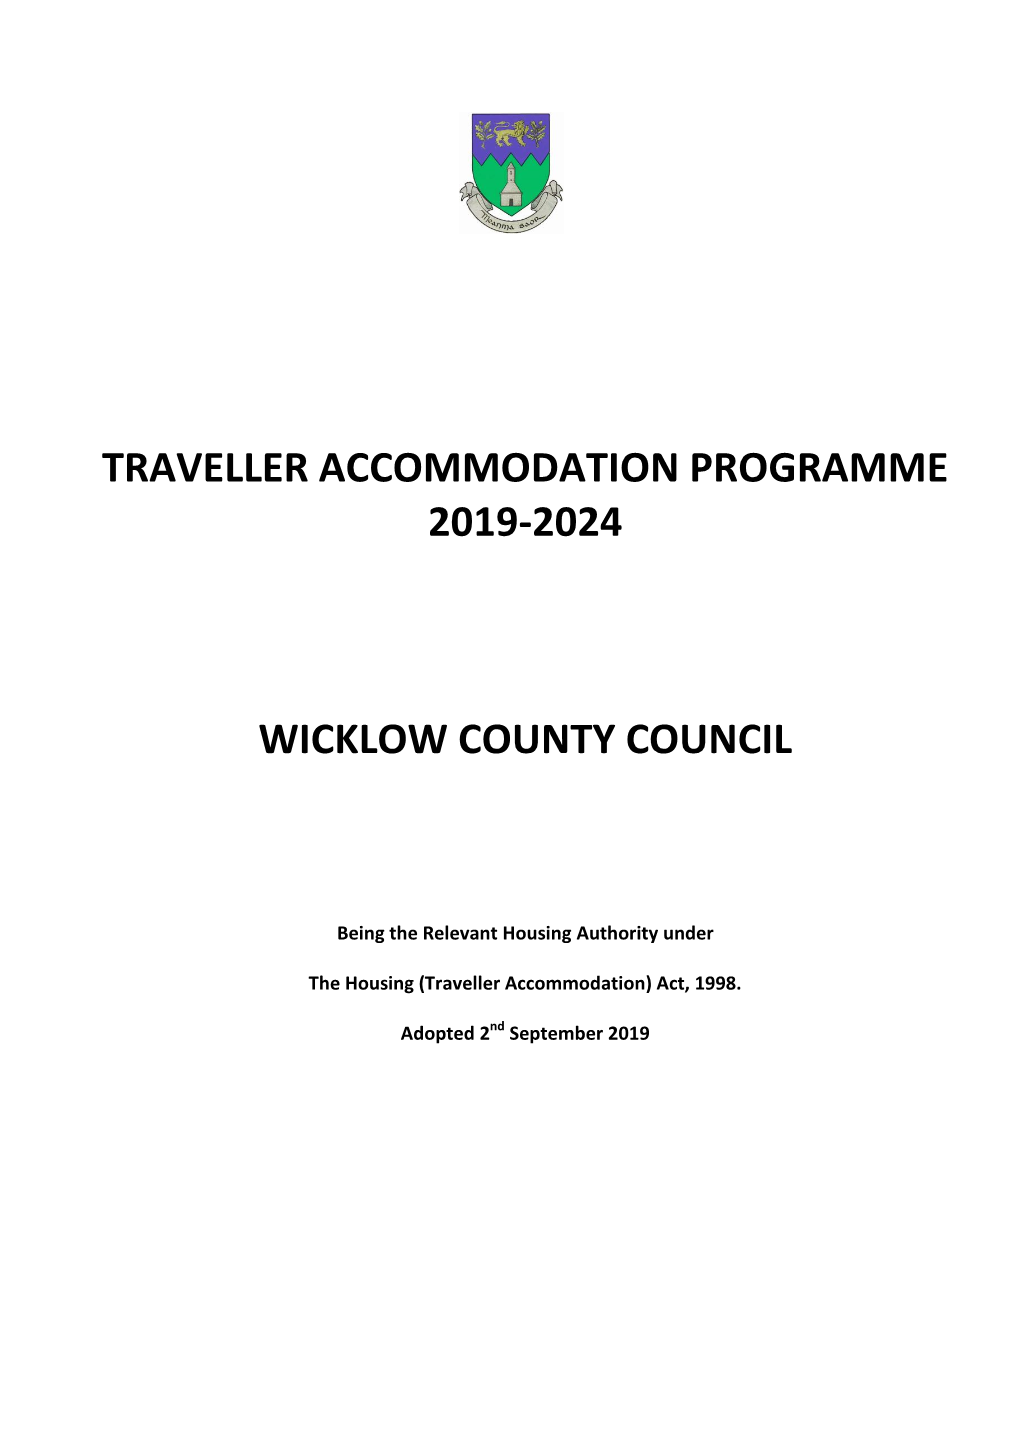 Traveller Accommodation Programme 2019-2024 Wicklow County Council